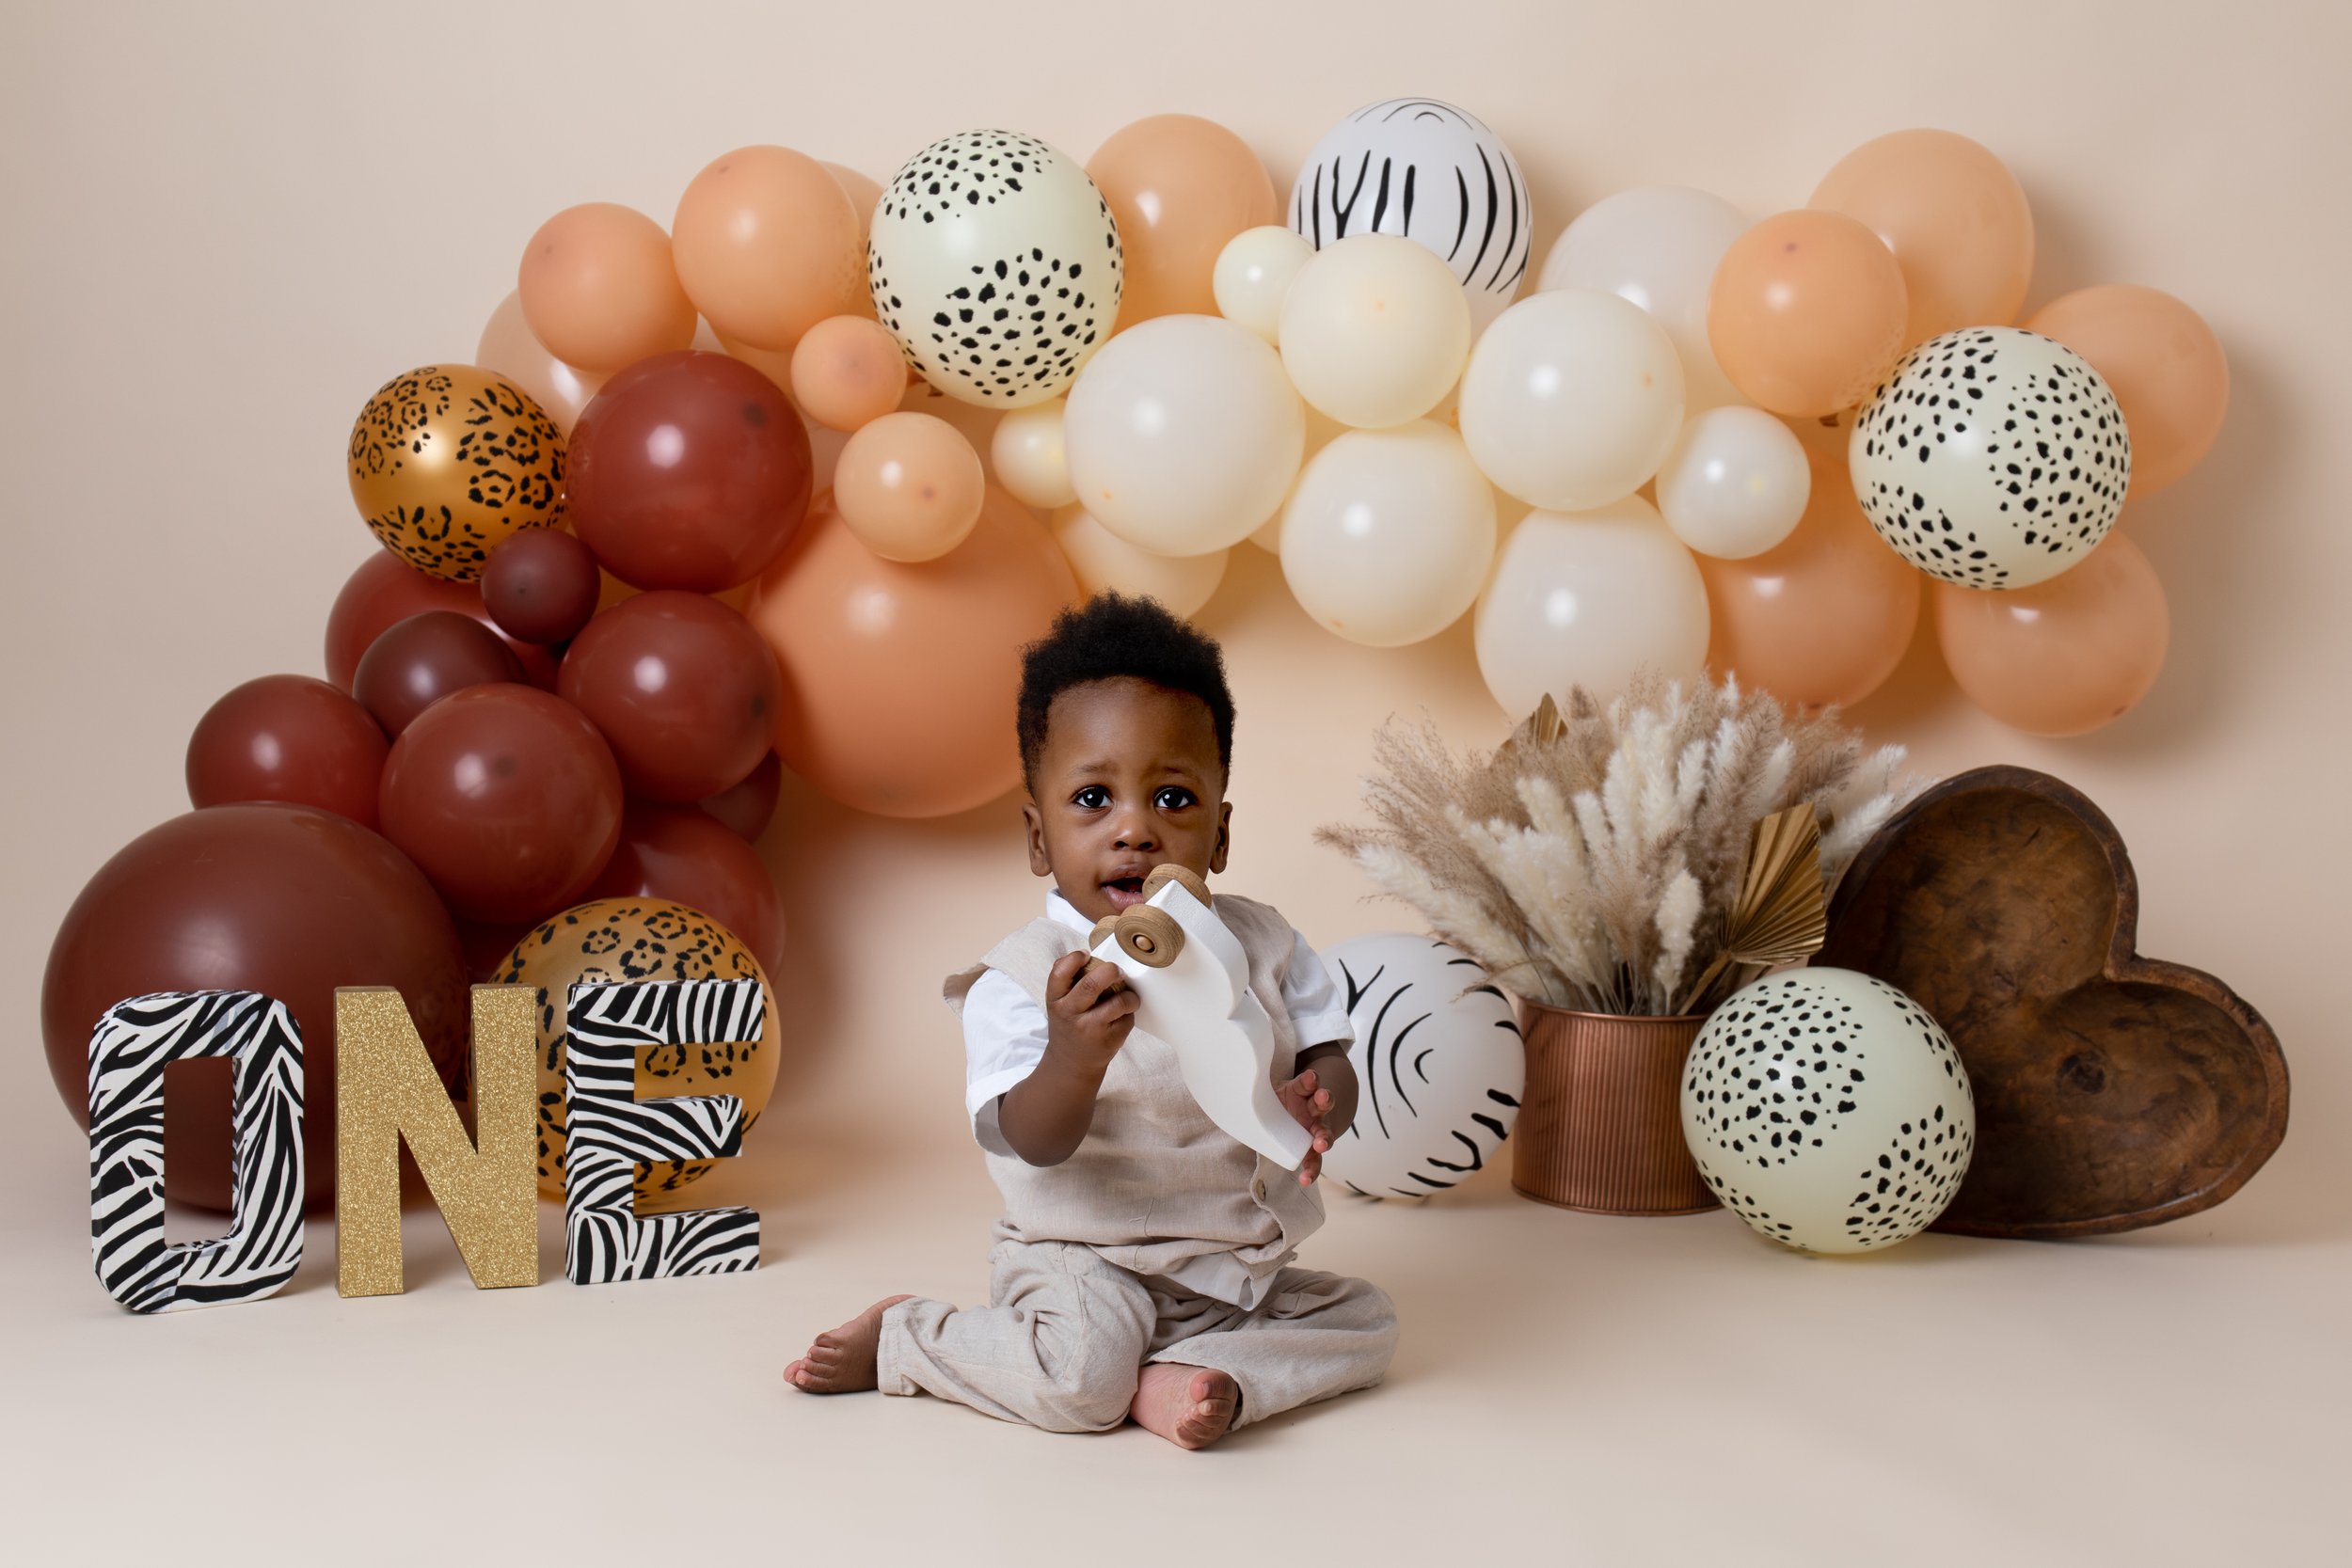  One year old boy in a safari theme picture holding wooden toy in Milton Keynes studio  